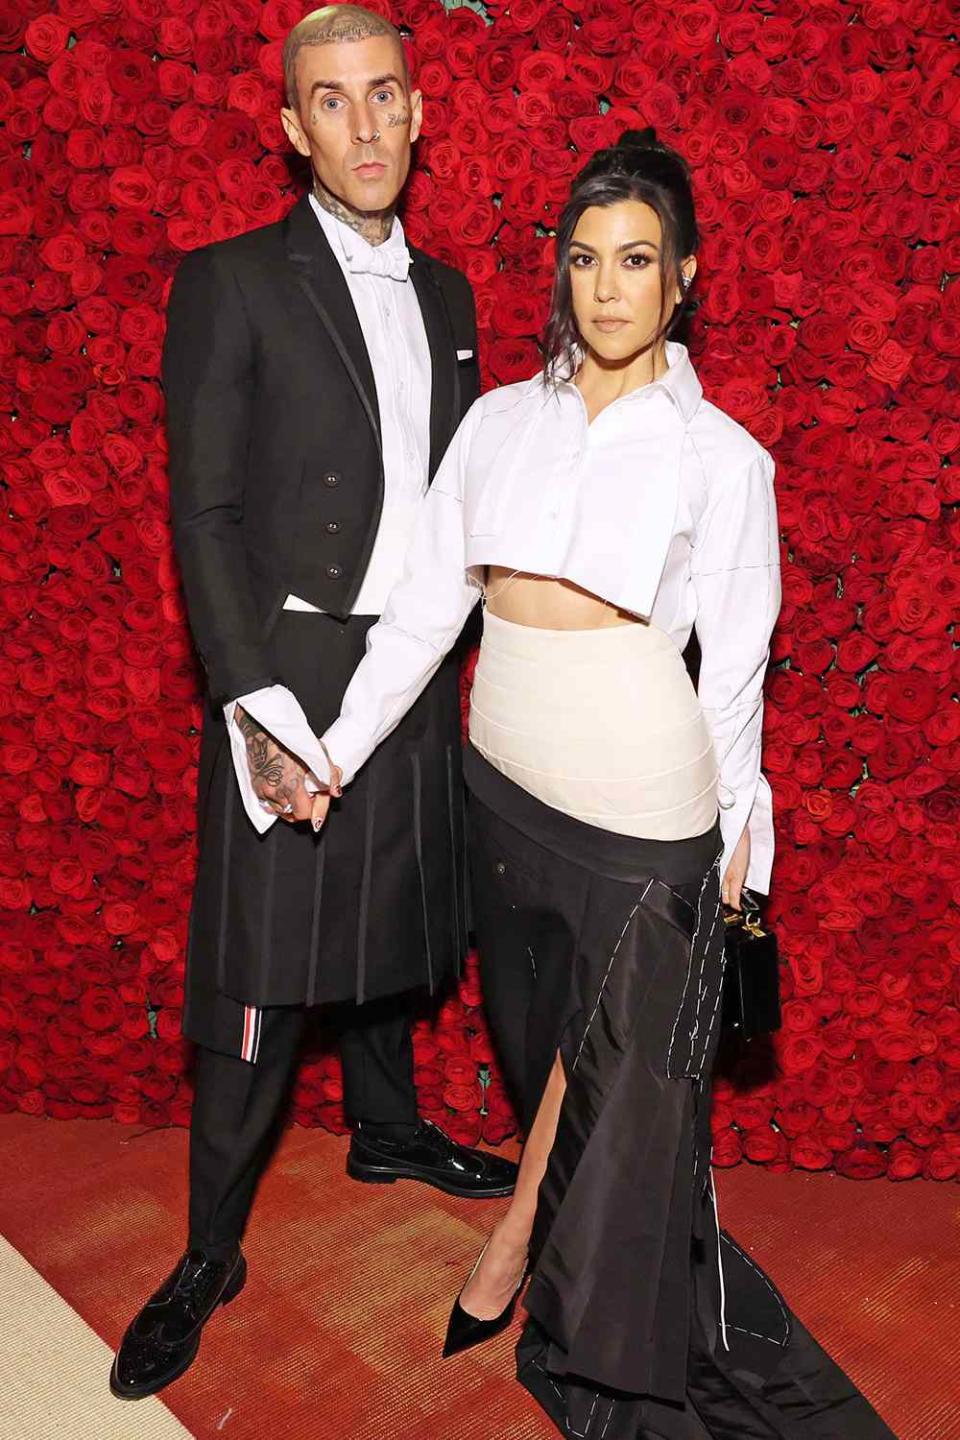 NEW YORK, NEW YORK - MAY 02: (Exclusive Coverage) (L-R) Travis Barker and Kourtney Kardashian attend The 2022 Met Gala Celebrating 